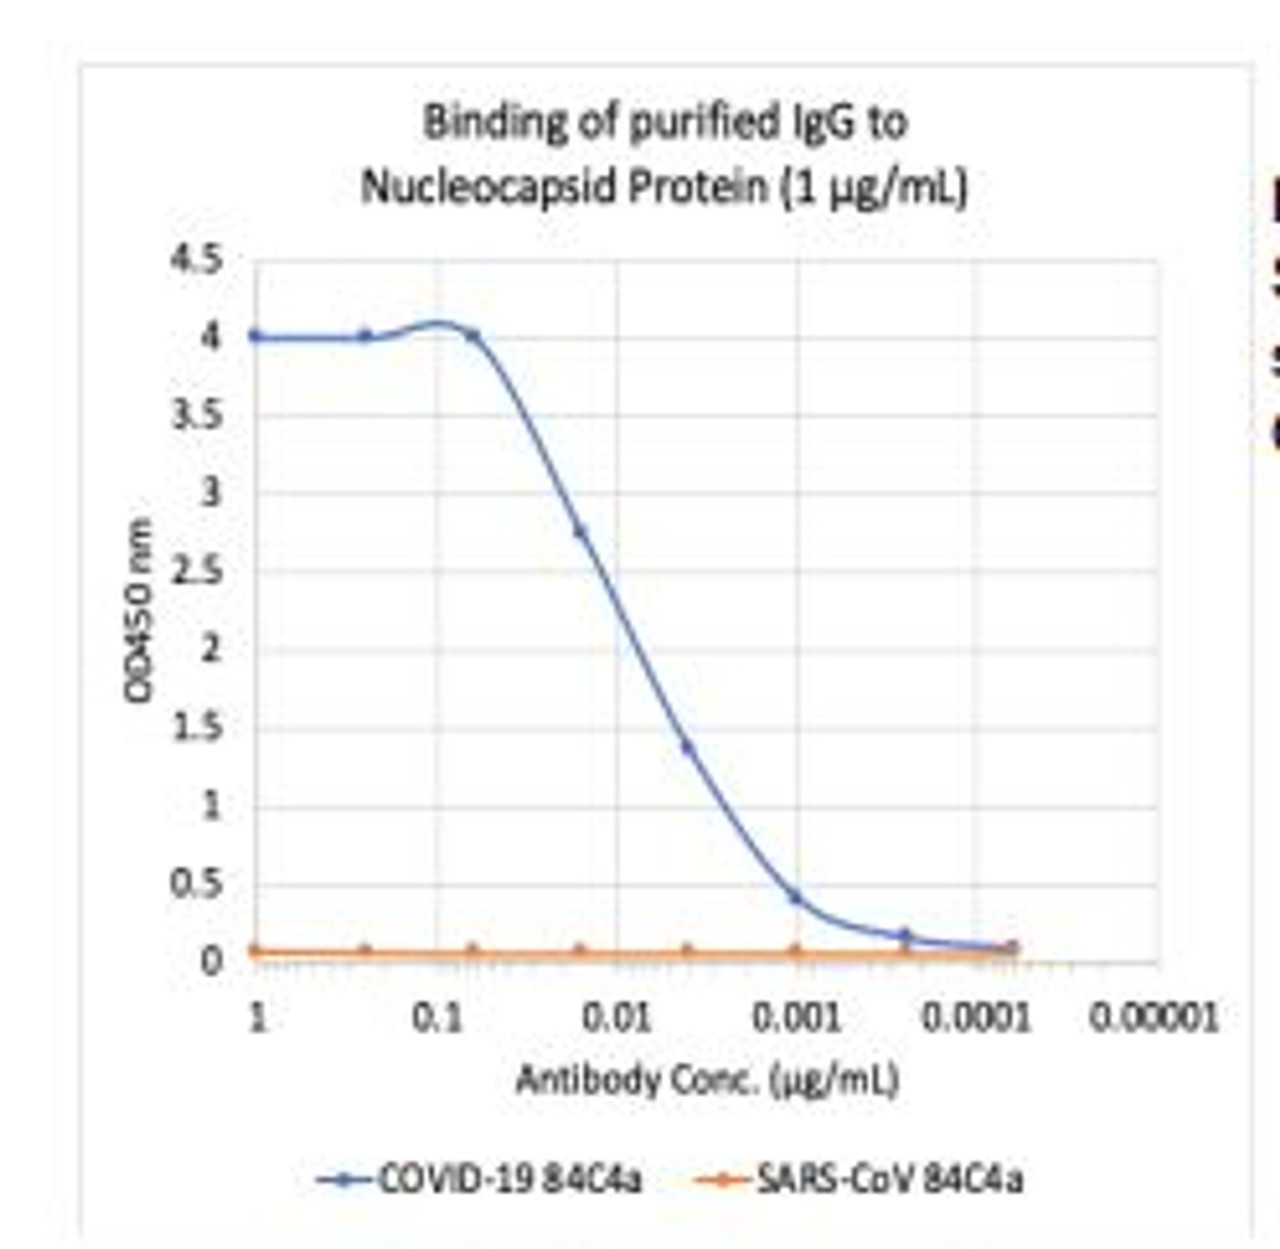 Microtiter wells were coated with SARS-CoV-2 (COVID-19) Nucleocapsid Protein (NP) and SARS-CoV NP at 1 ug/mL. Purified rabbit monoclonal antibody 84C4a was
serially diluted 1:2 starting at 1 ug/mL, and shows very strong and specific binding to COVID-19 NP antigen, with no significant cross-reactivity to SARS-CoV NP antigen.